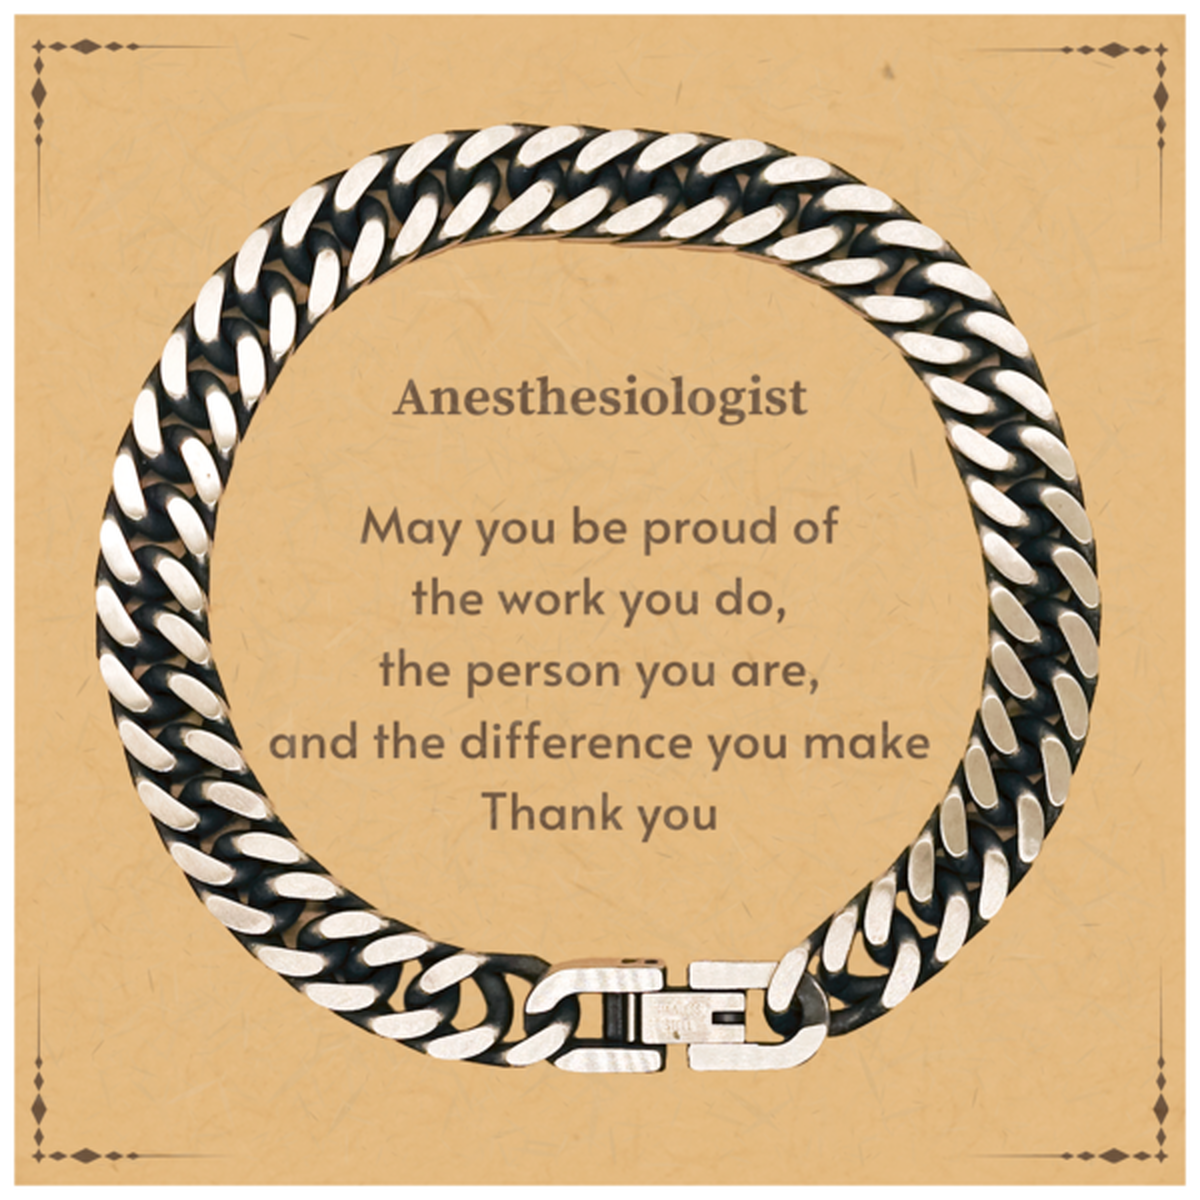 Heartwarming Cuban Link Chain Bracelet Retirement Coworkers Gifts for Anesthesiologist, Anesthesiologist May You be proud of the work you do, the person you are Gifts for Boss Men Women Friends